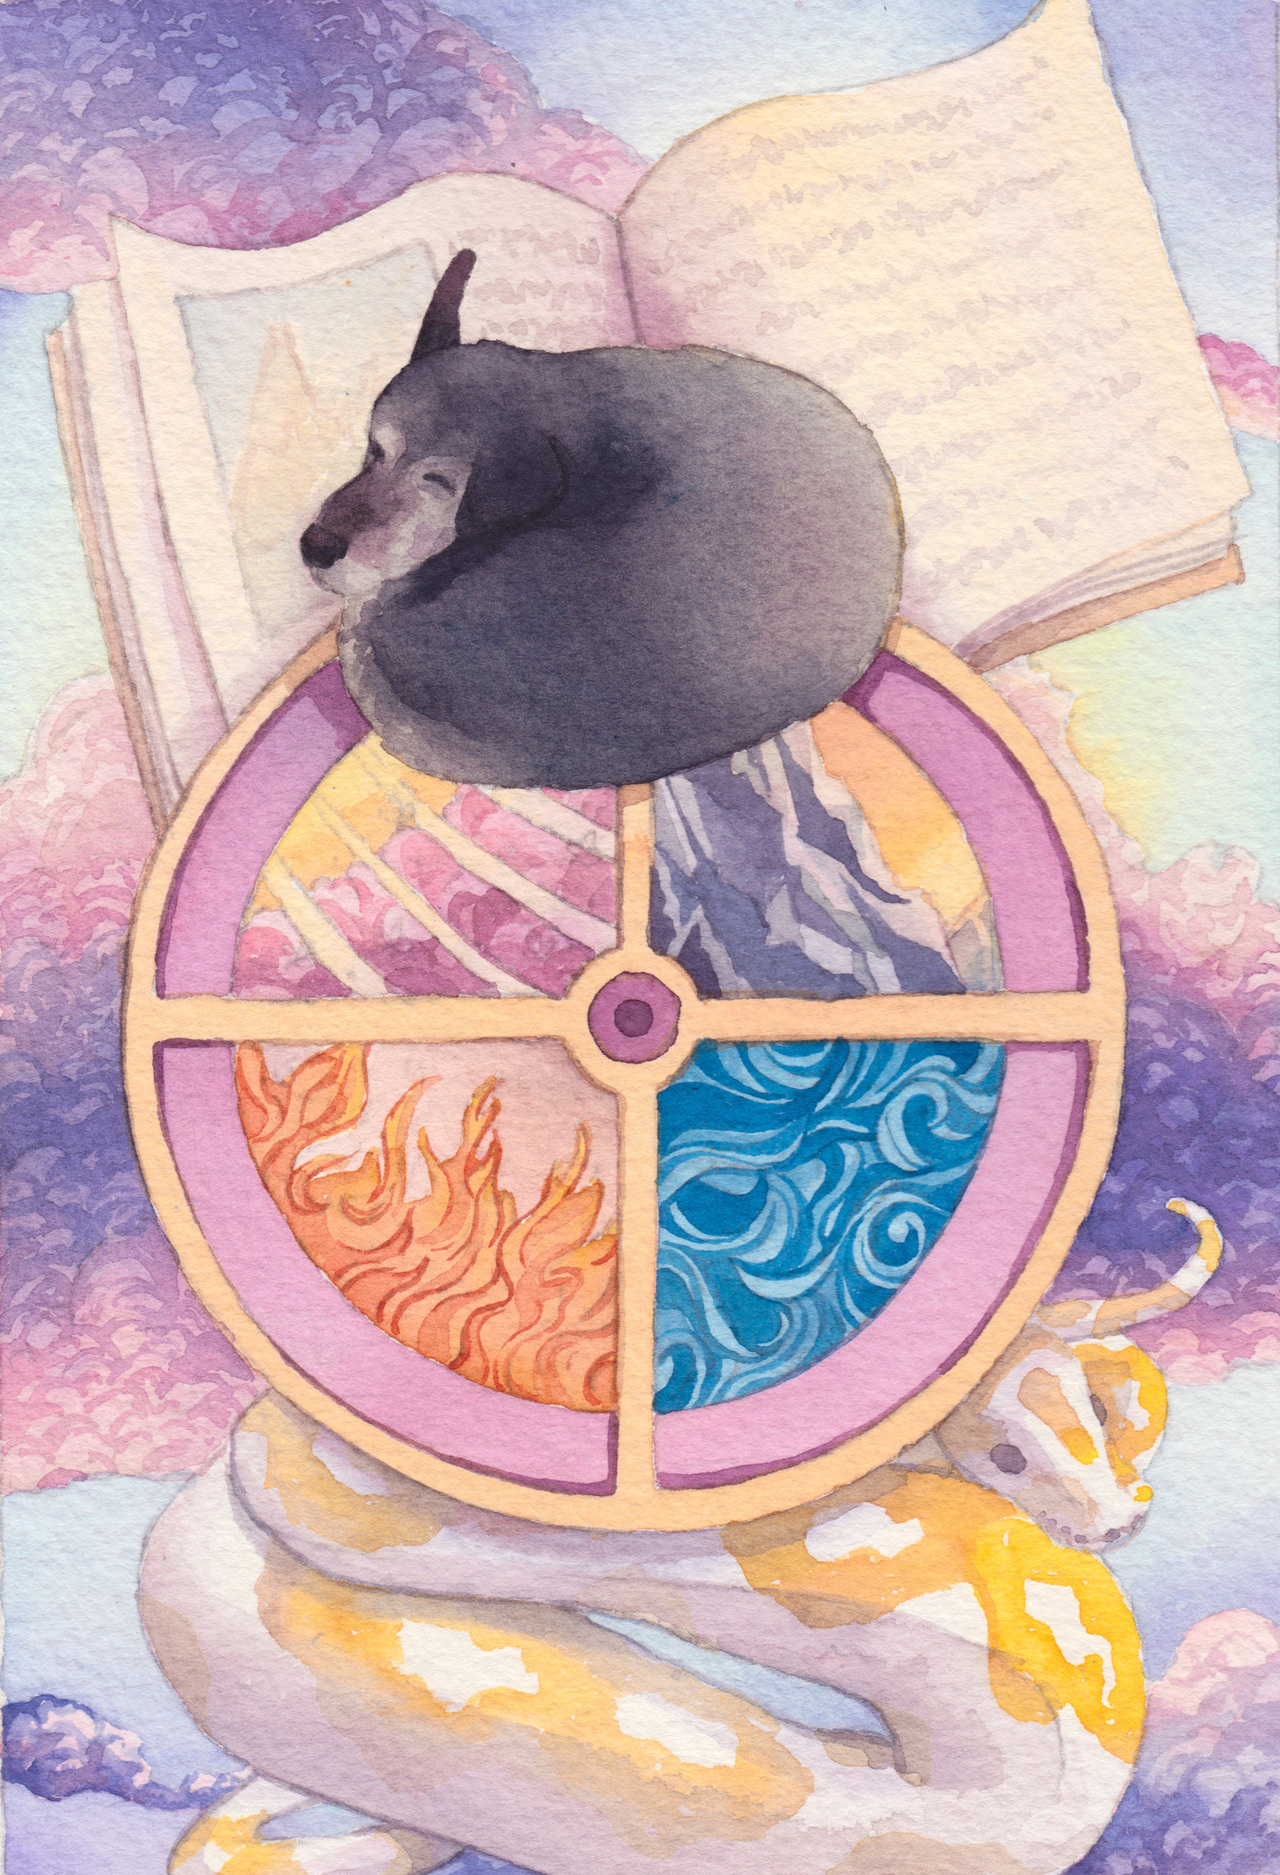 The Major Barkana’s Wheel of Fortune tarot card! It’s part of a dog themed tarot deck, fundraising for service dogs. You can learn more here or follow us here: @themajorbarkana